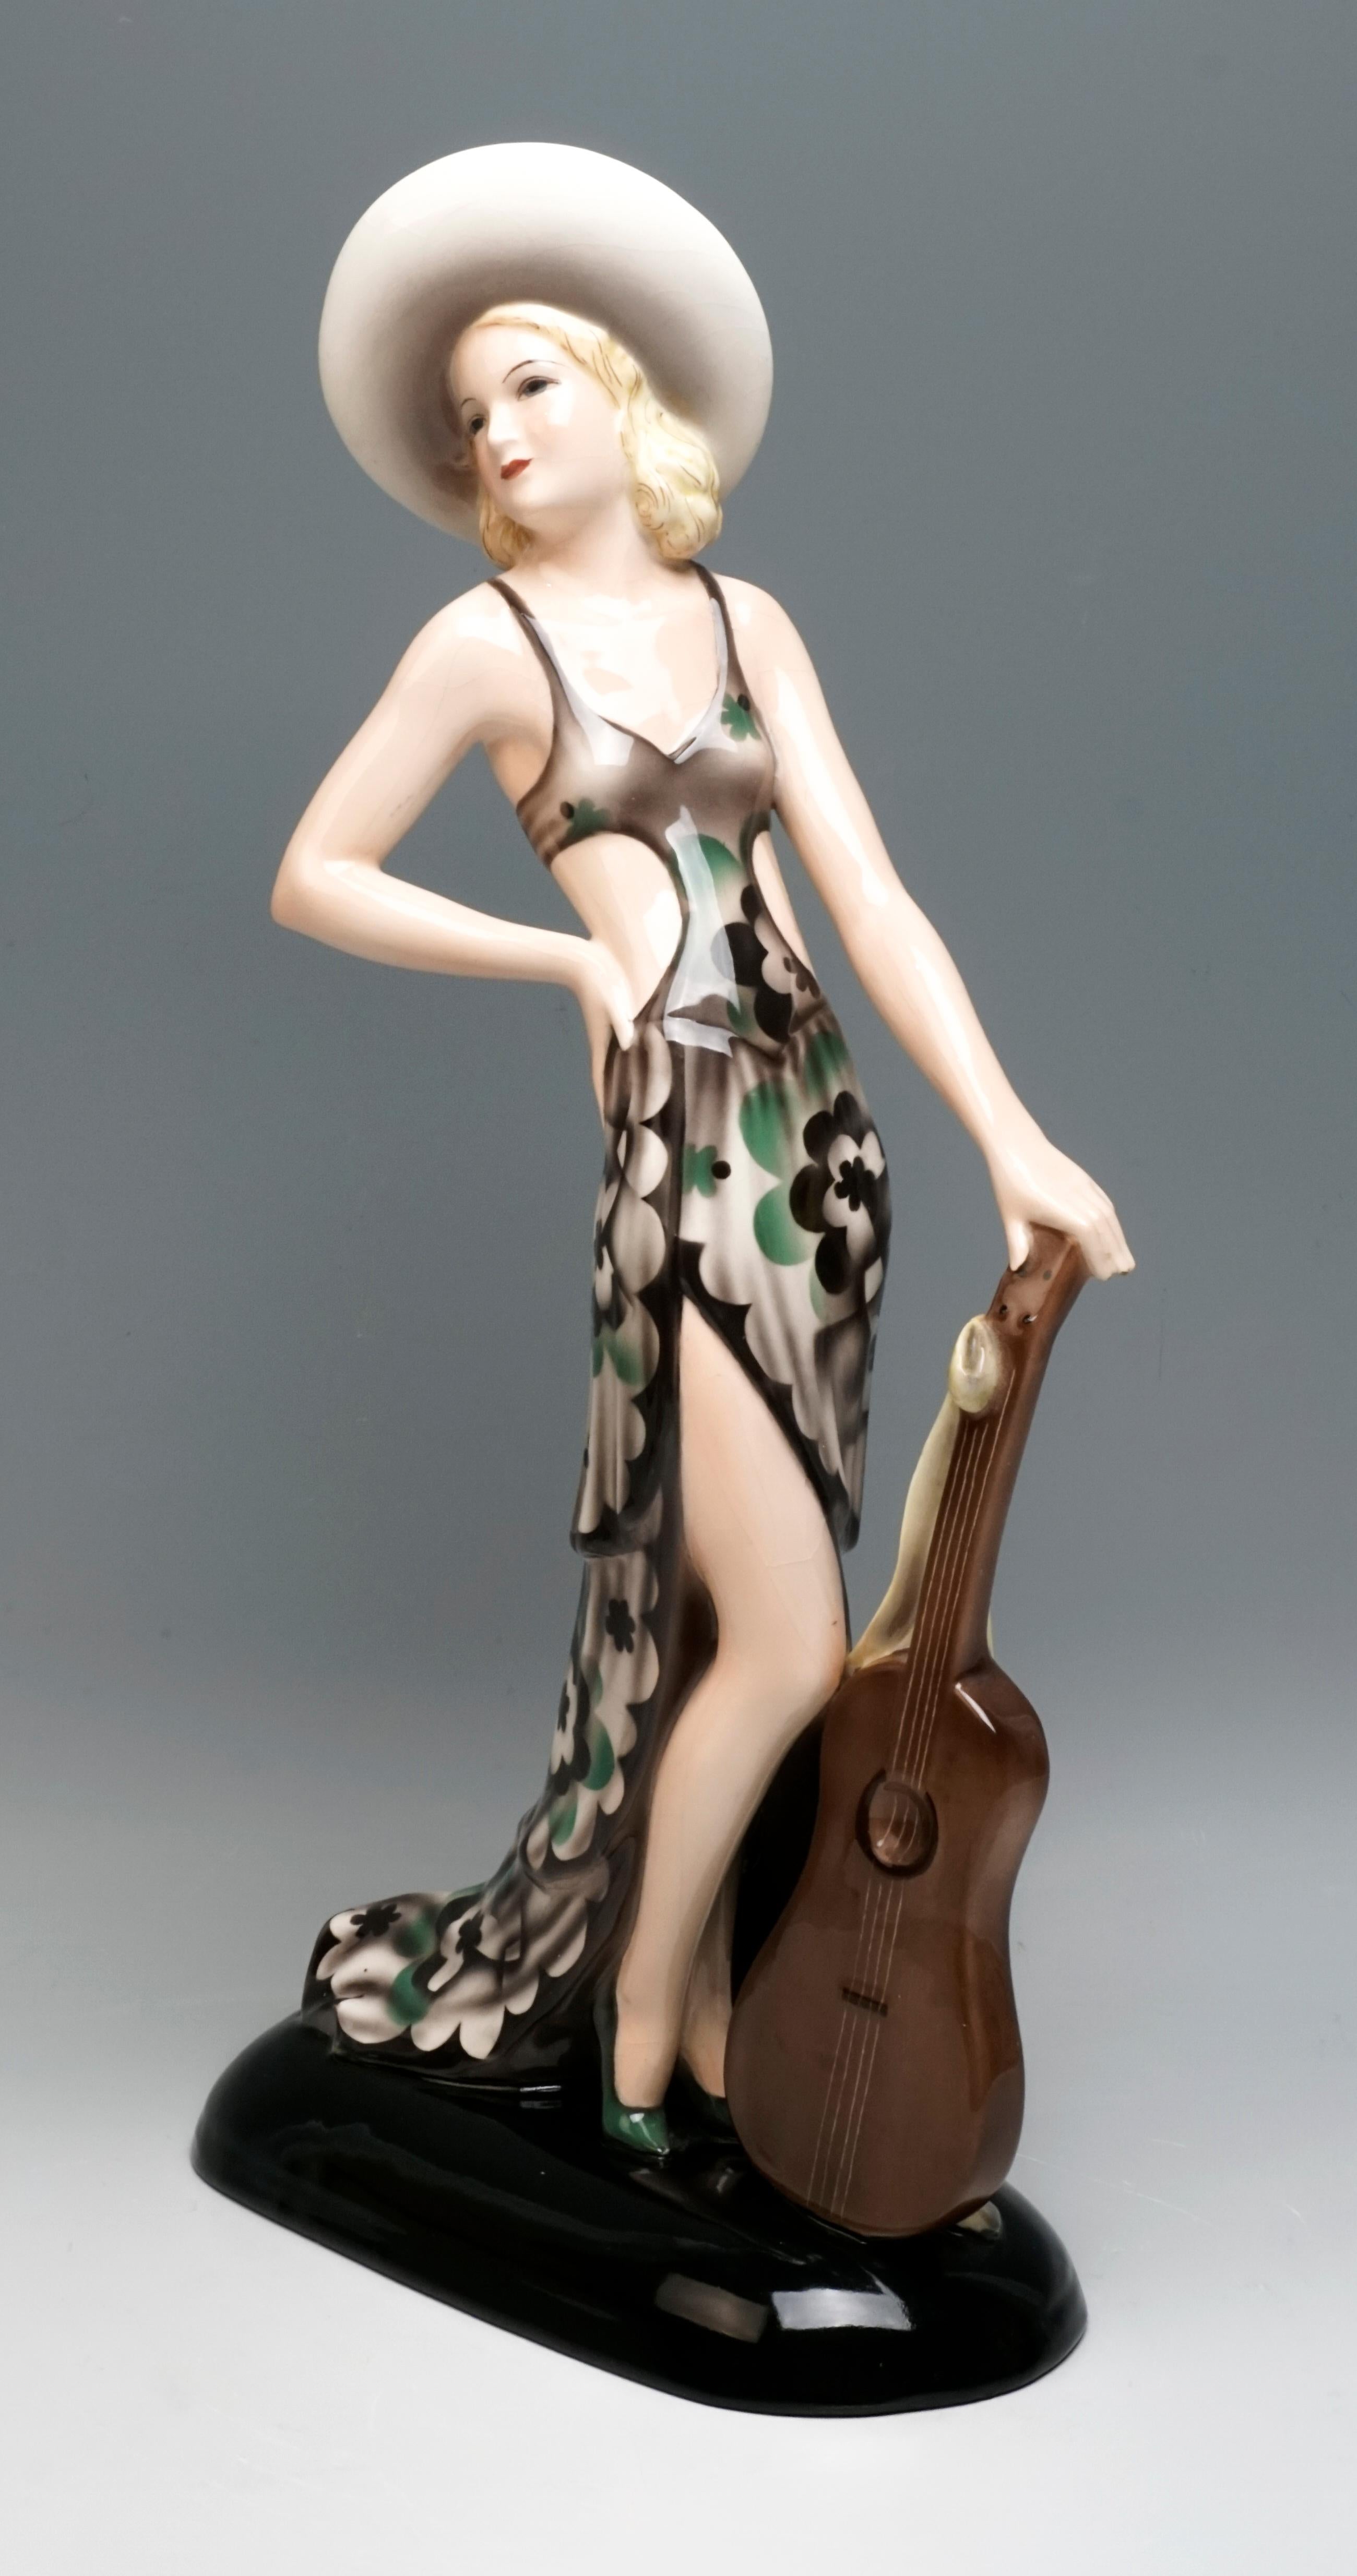 Rare Goldscheider Art Deco Ceramic Figurine.
The standing young lady is wearing a gray-green-beige dress with a bustier, an elegant, broad-brimmed, light-colored hat sits on her blond curls. Looking to the right, she lets her right, slightly raised